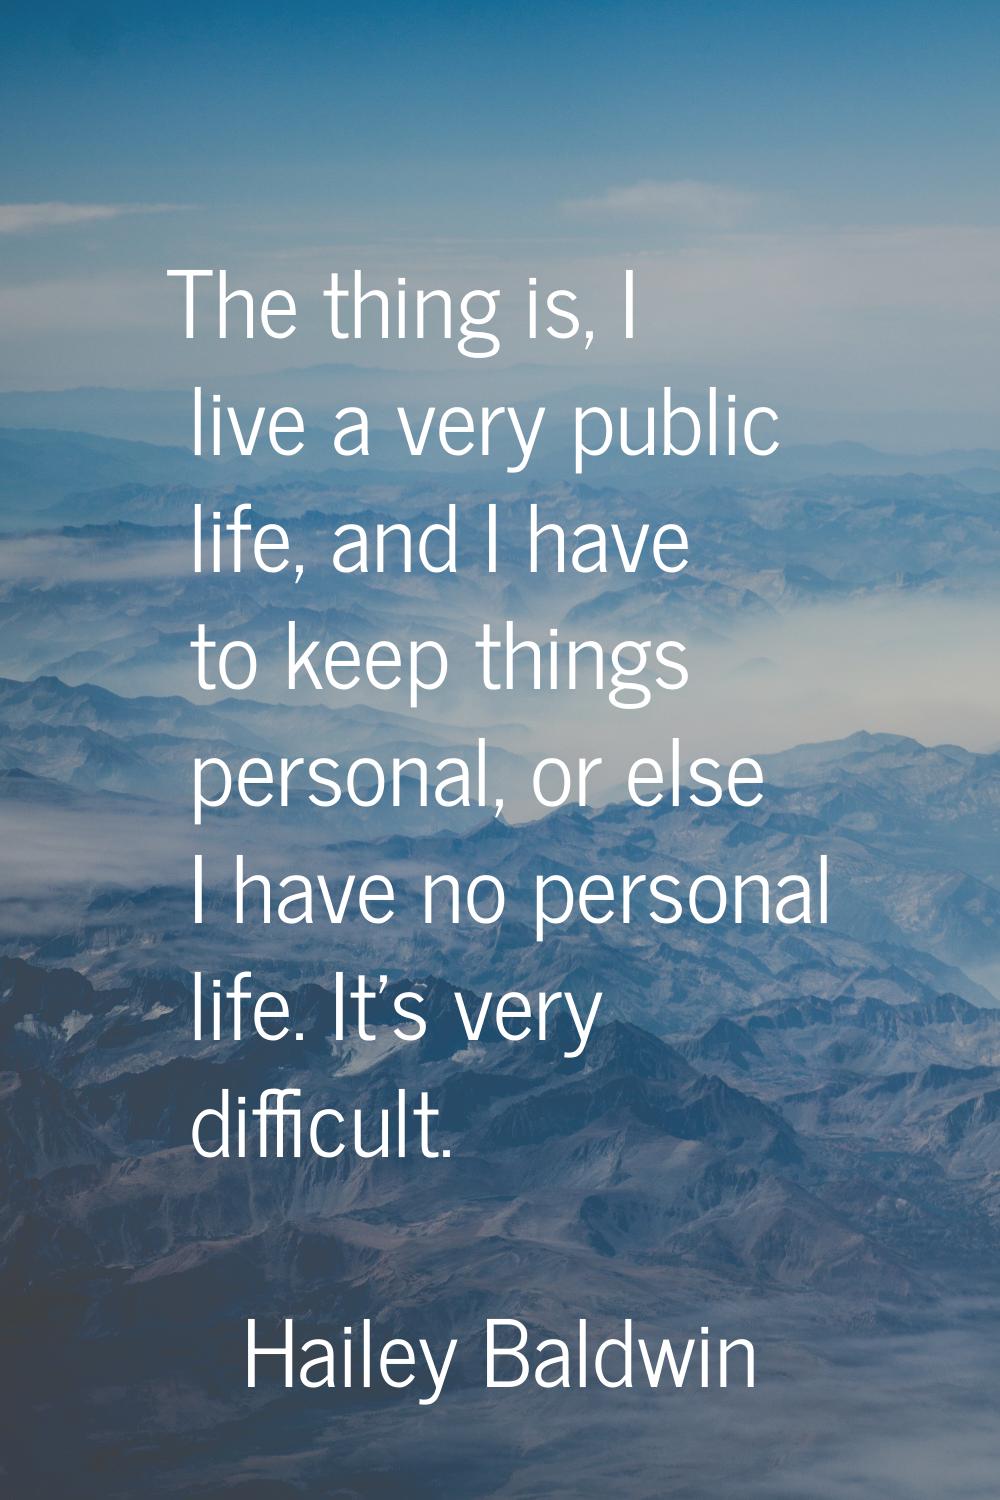 The thing is, I live a very public life, and I have to keep things personal, or else I have no pers